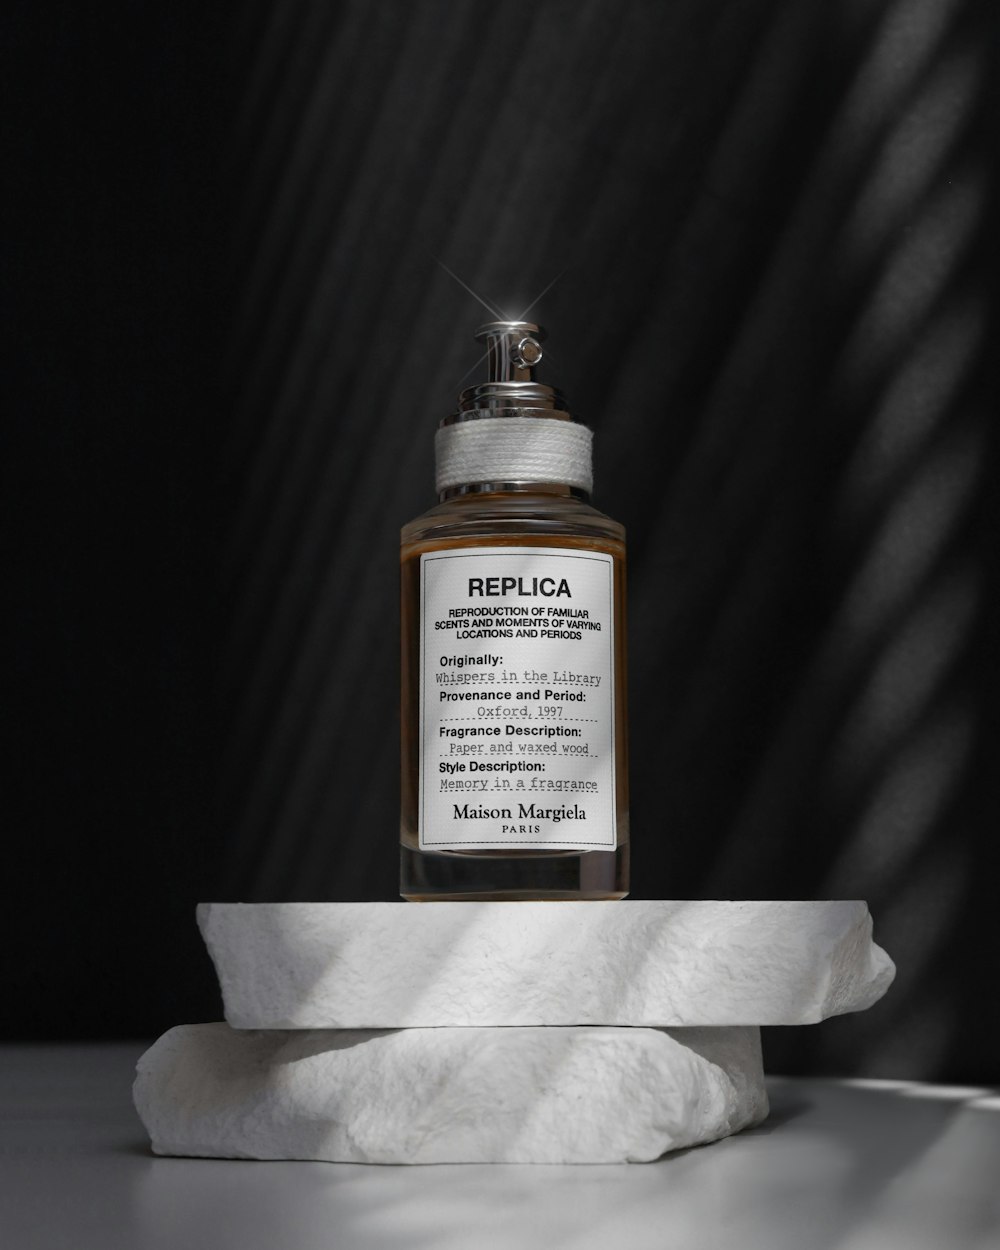 a bottle of perfume on a white towel